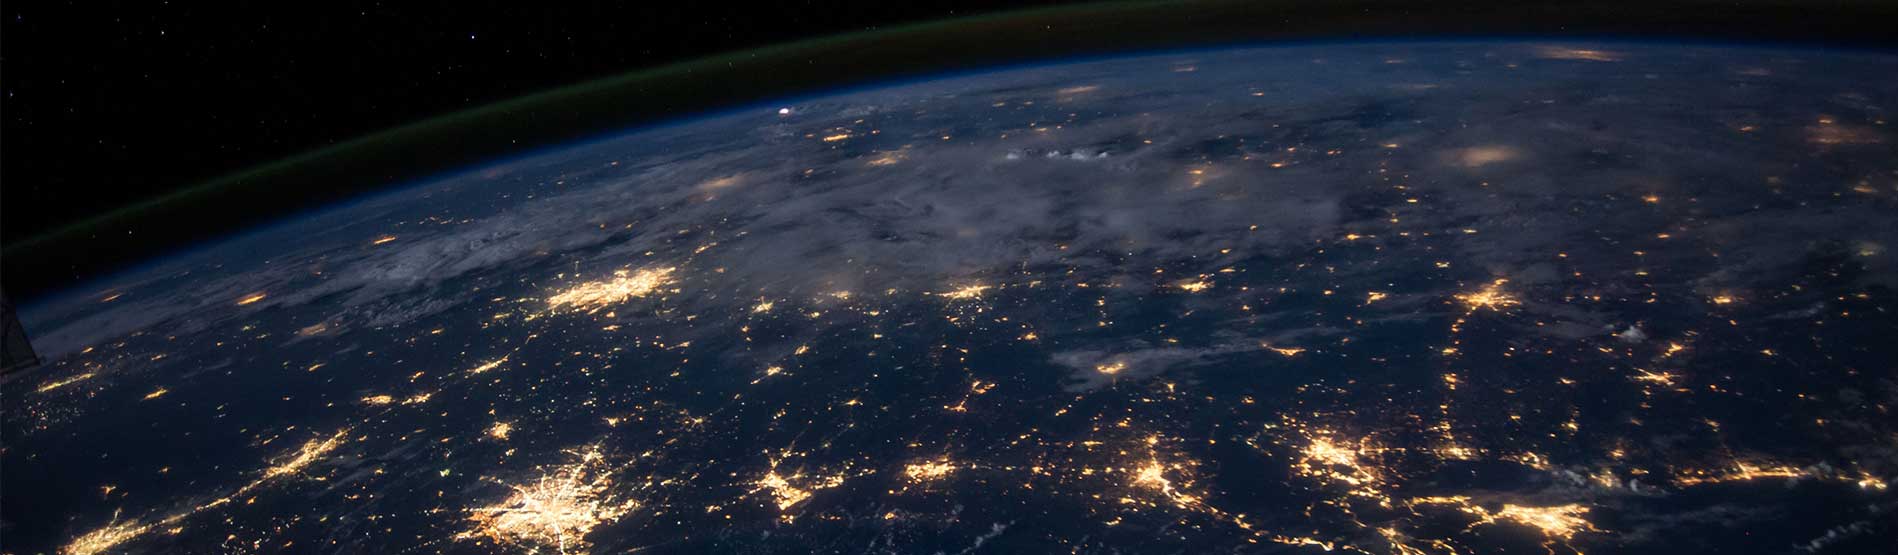 Photo of Earth at night with lights on